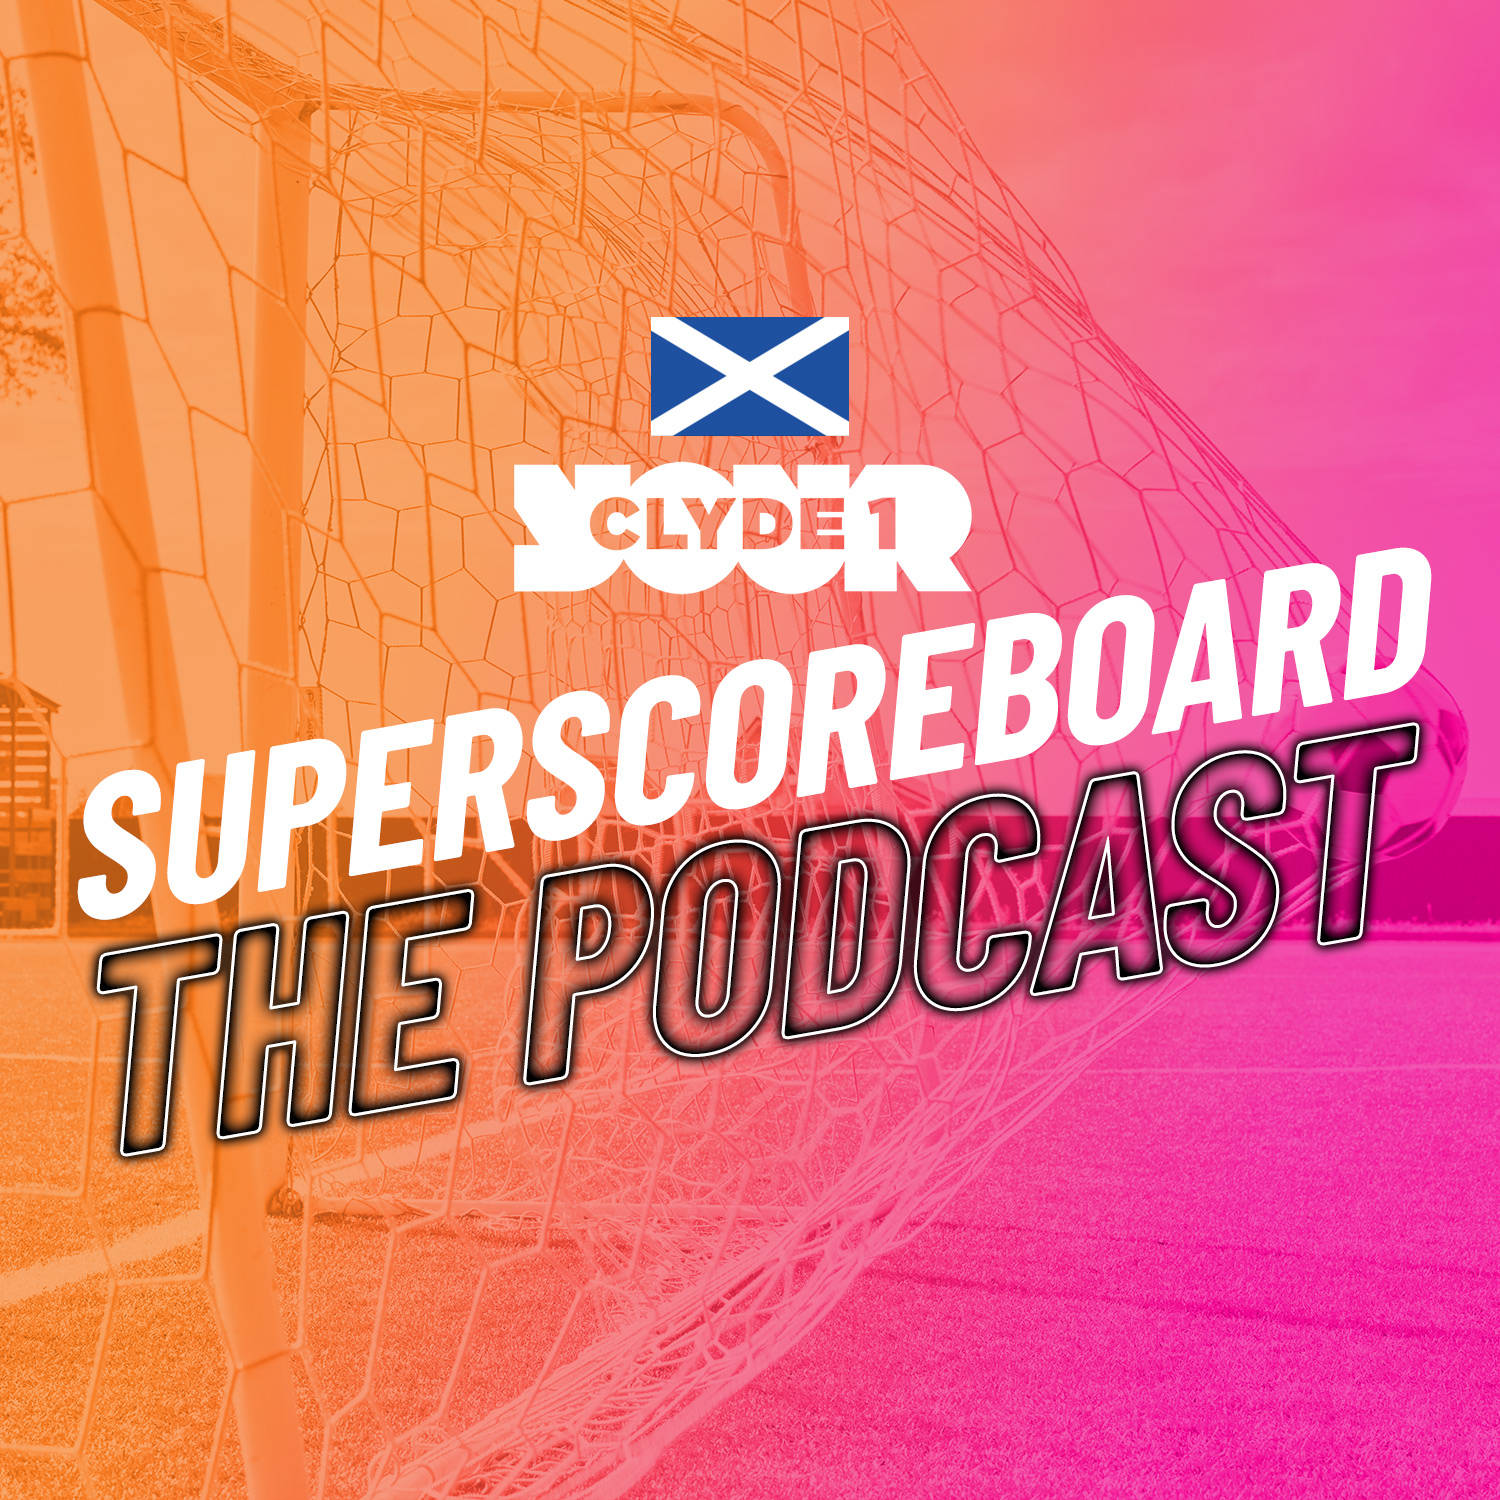 Tuesday 2nd April Clyde 1 Superscoreboard